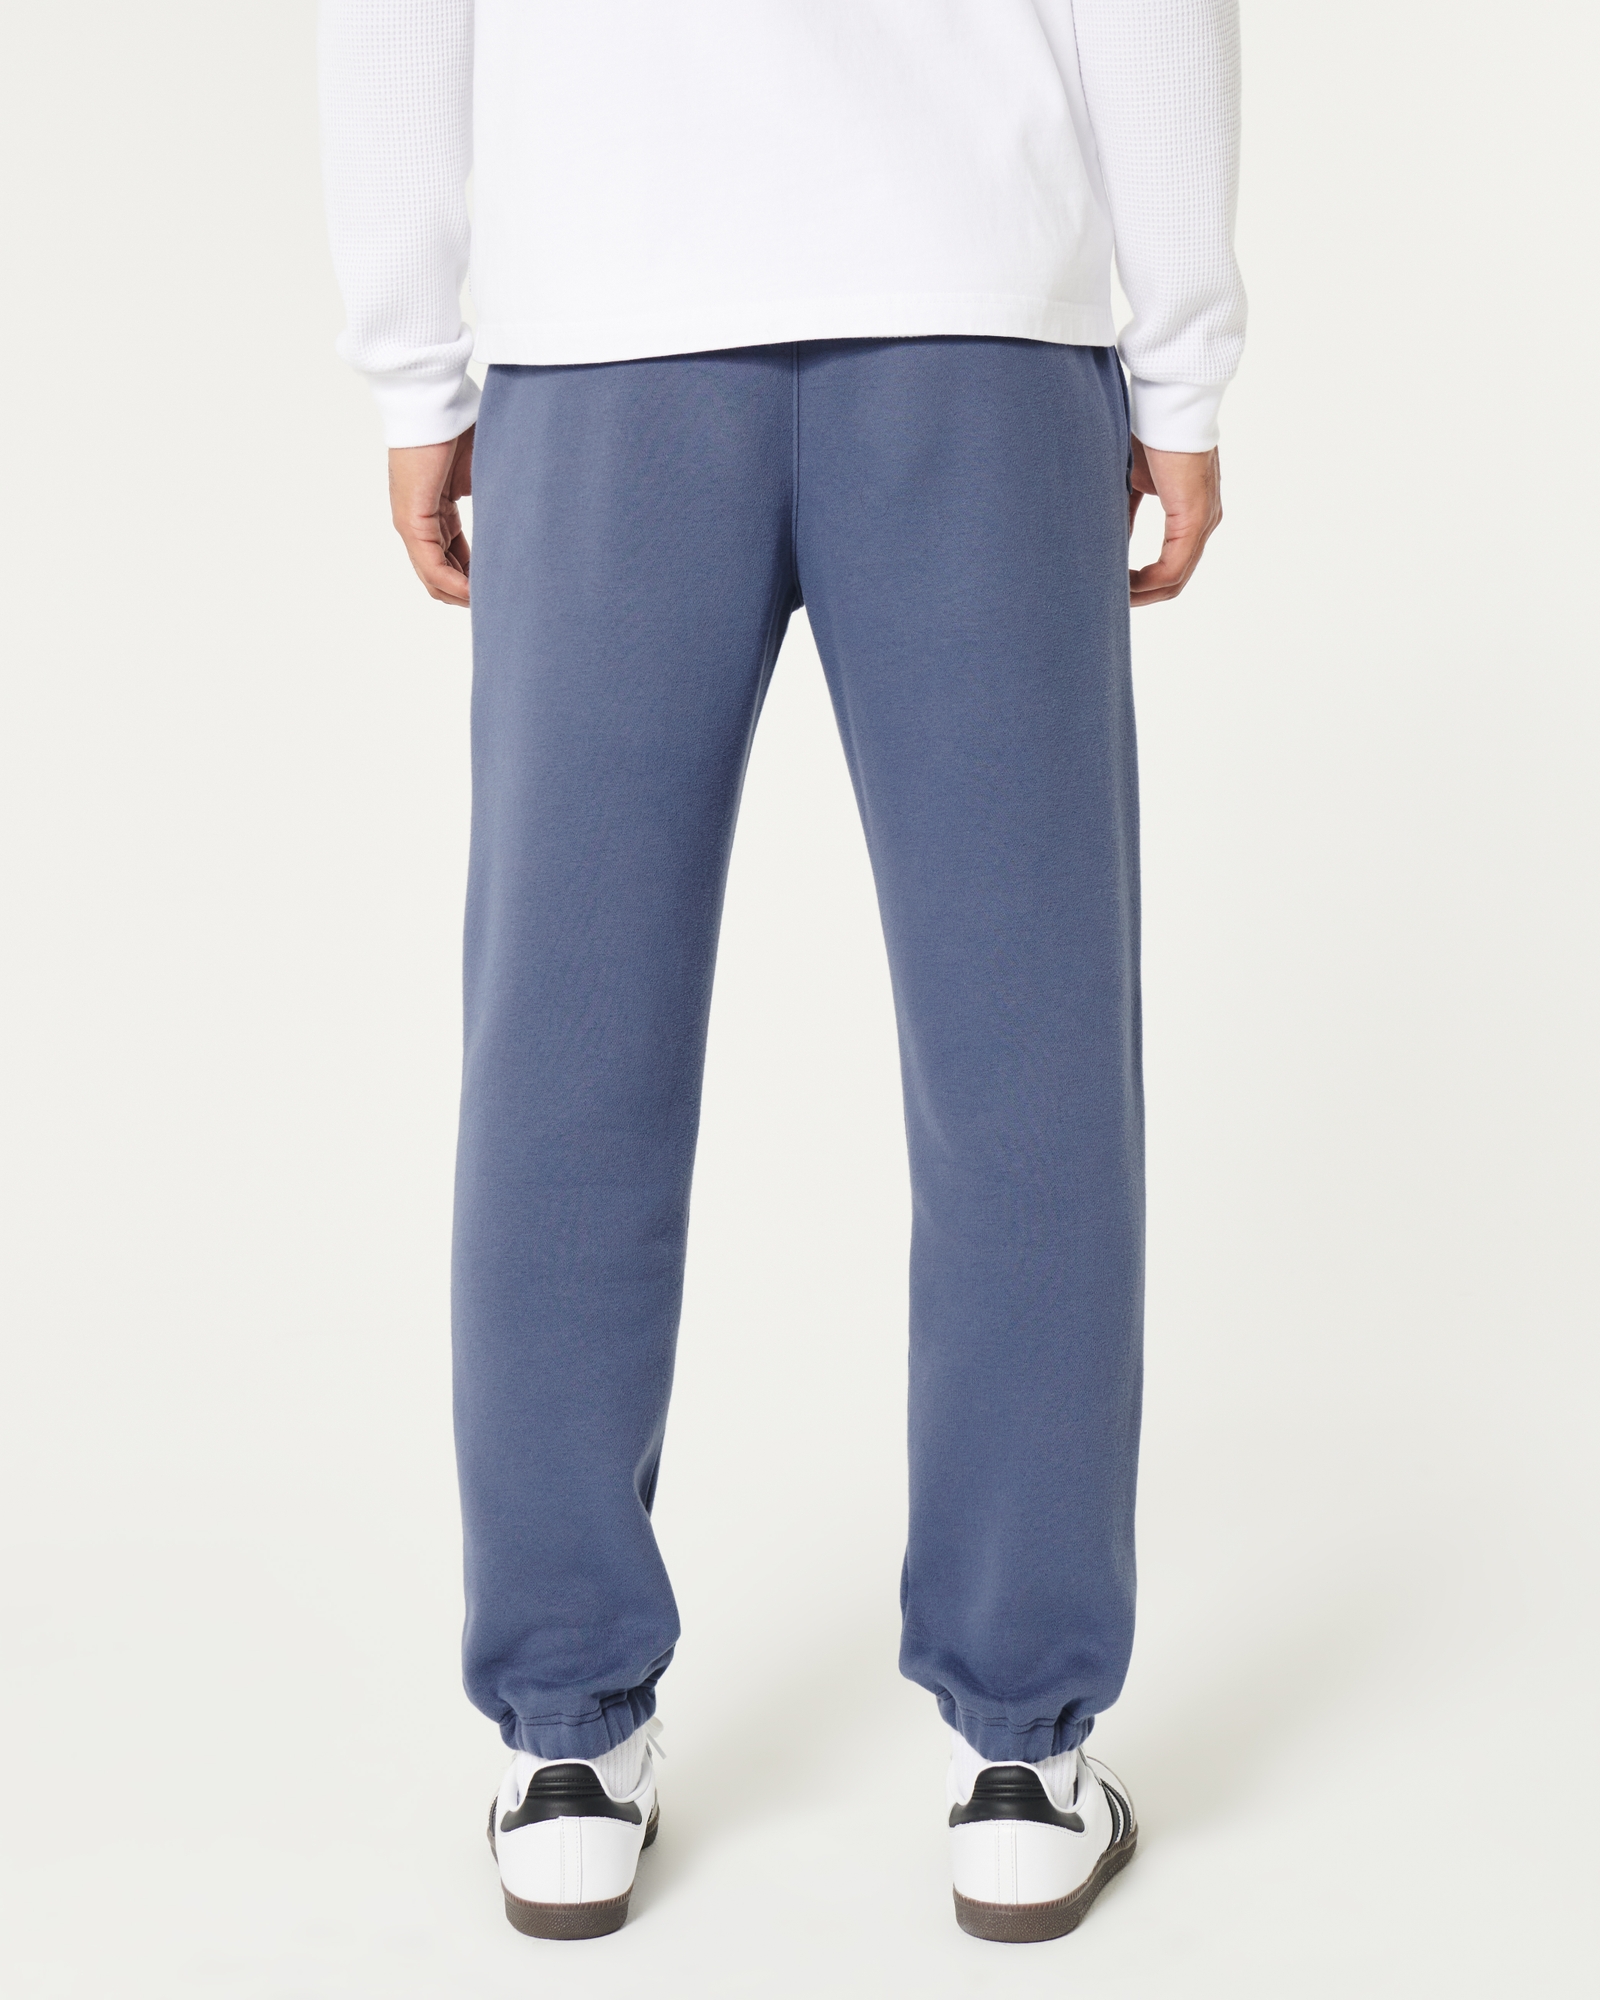 Hollister straight leg logo joggers in grey - ShopStyle Activewear Trousers